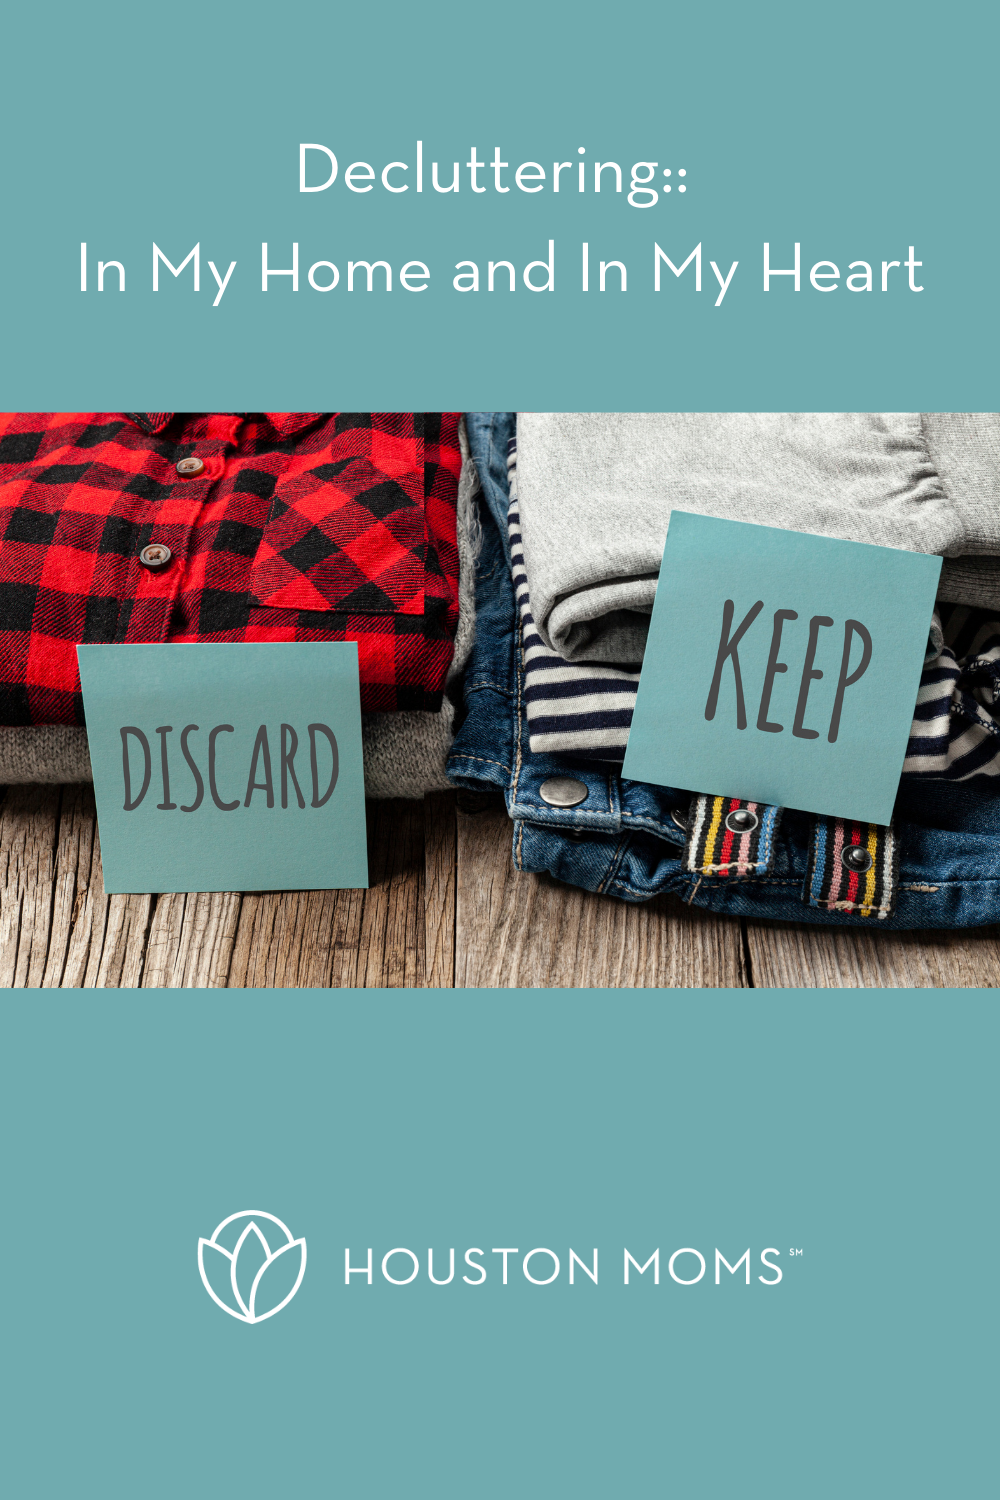 Houston Moms "Decluttering:: In My Home and In My Heart" #houstonmoms #houstonmomsblog #momsaroundhouston